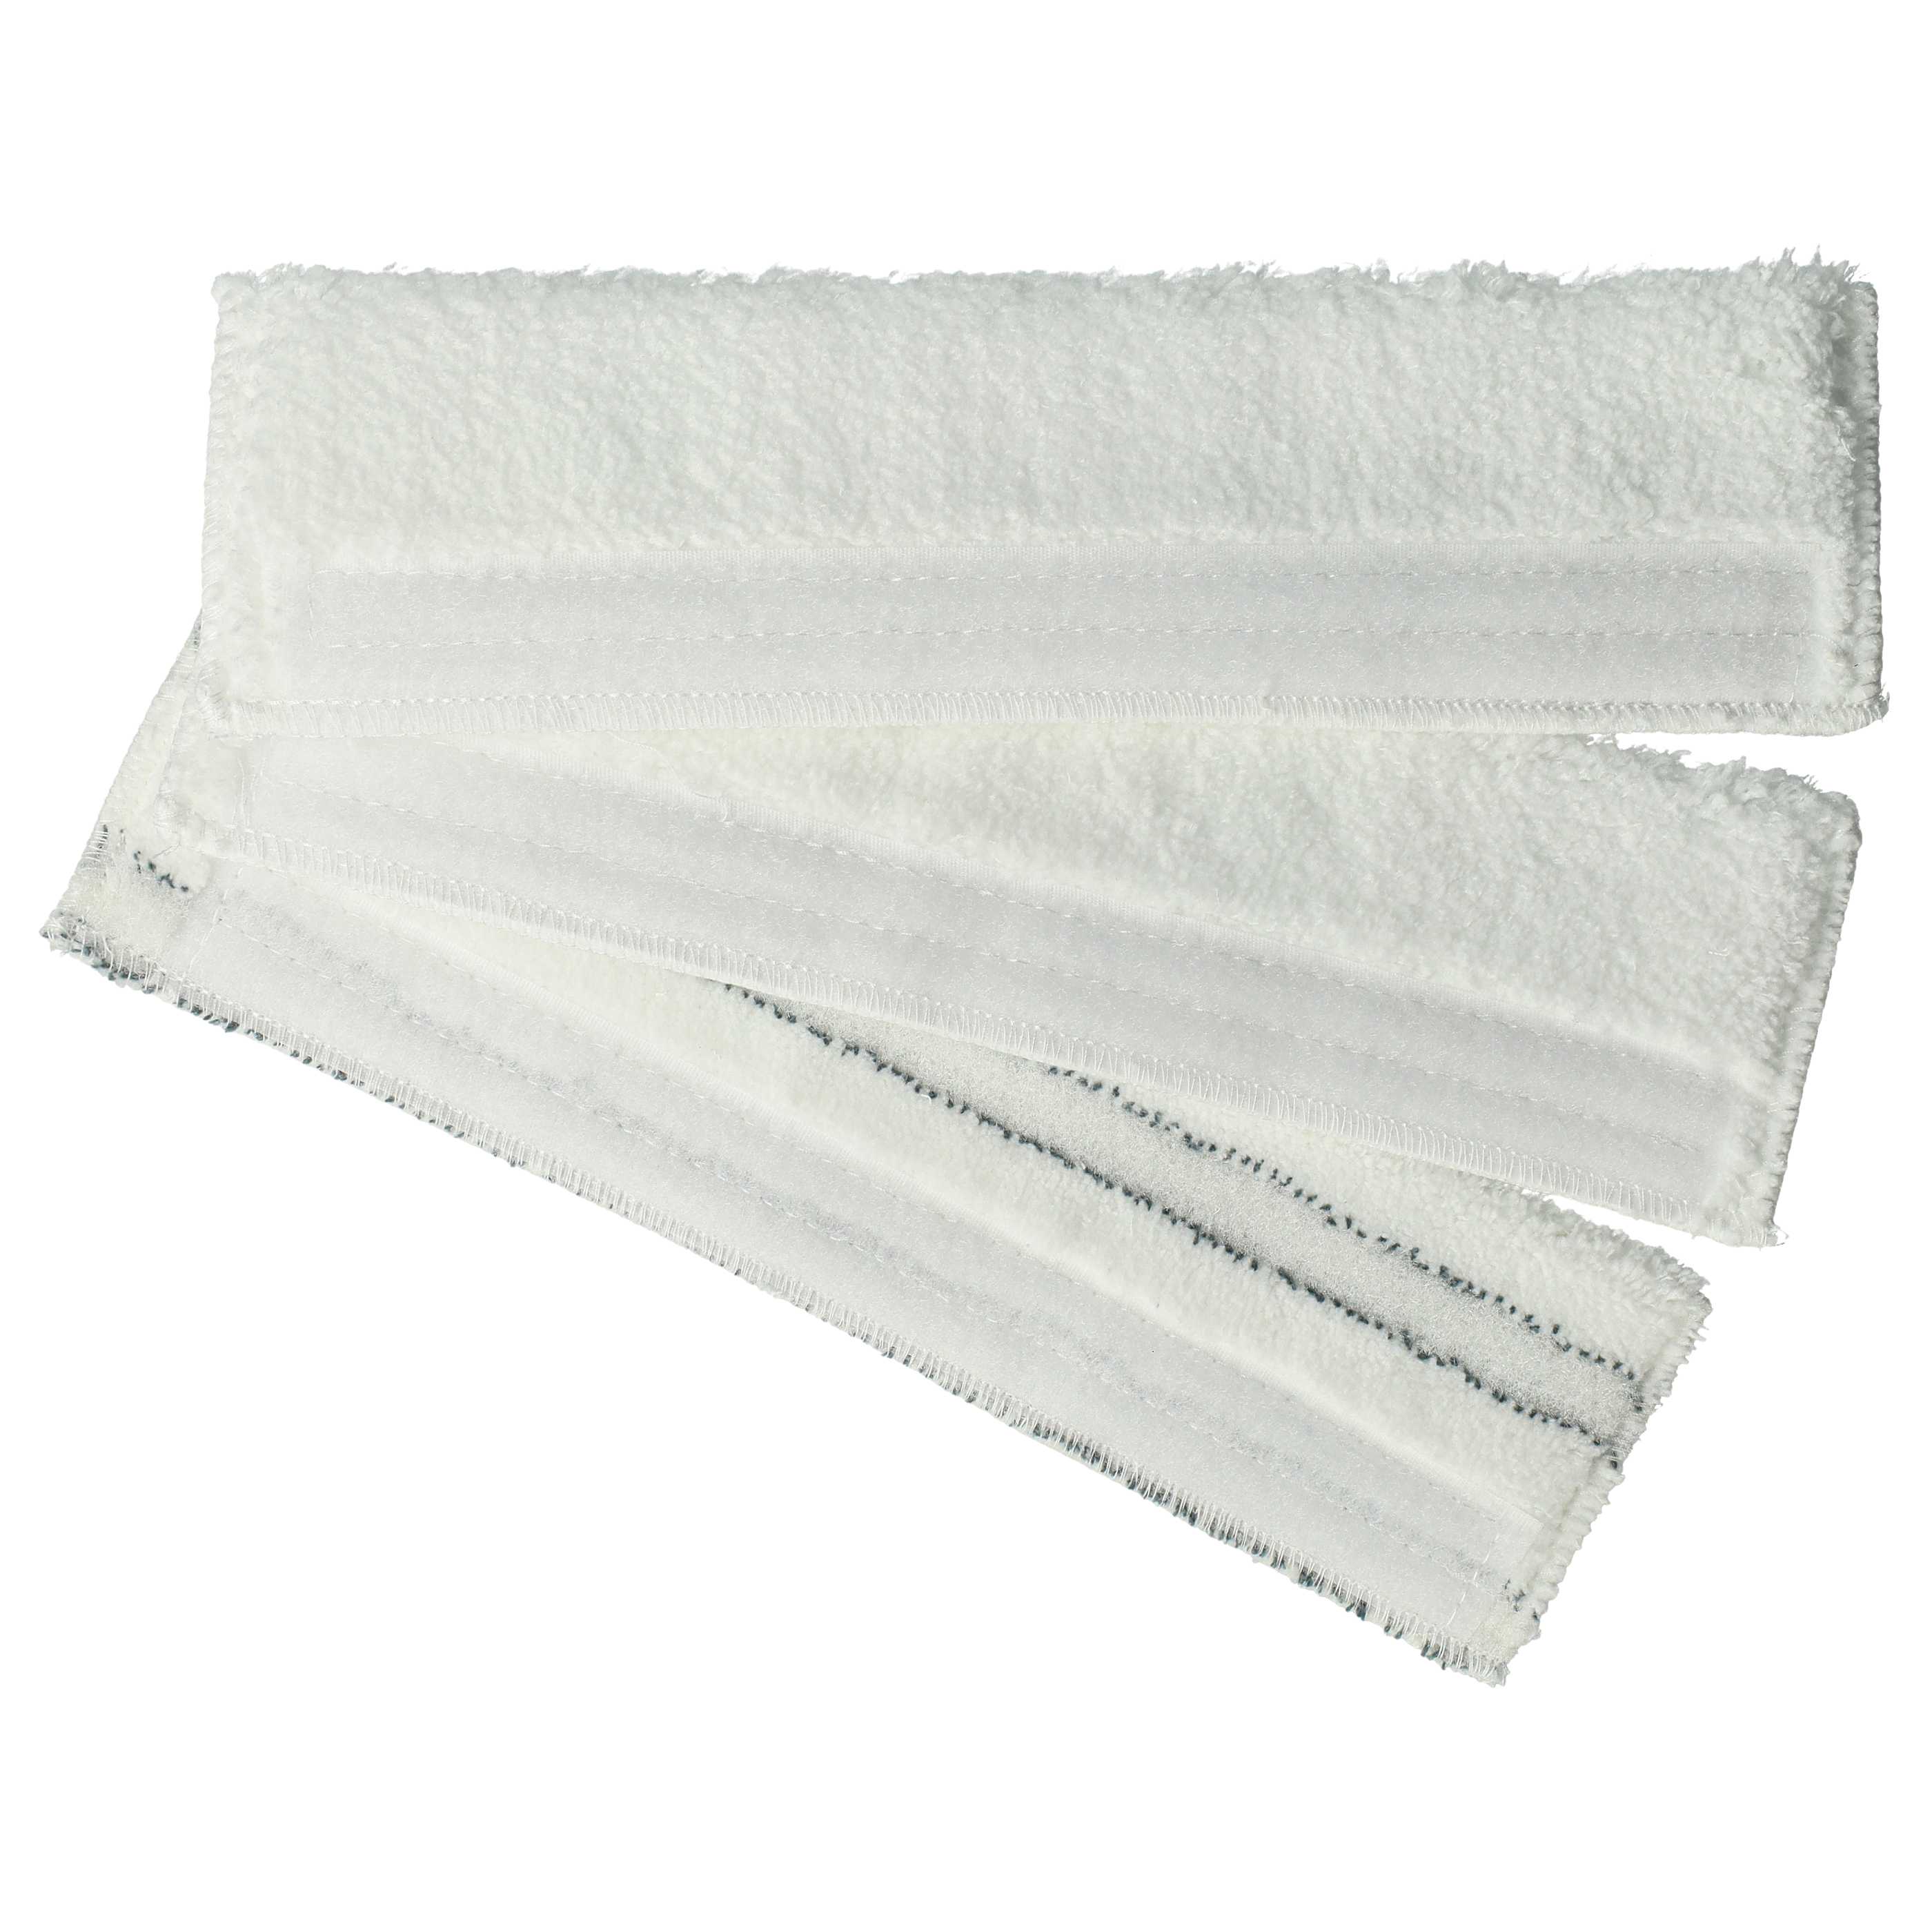  Cleaning Cloth Set (3 Part) replaces Thomas 787204 for Vacuum Cleaner - microfibre